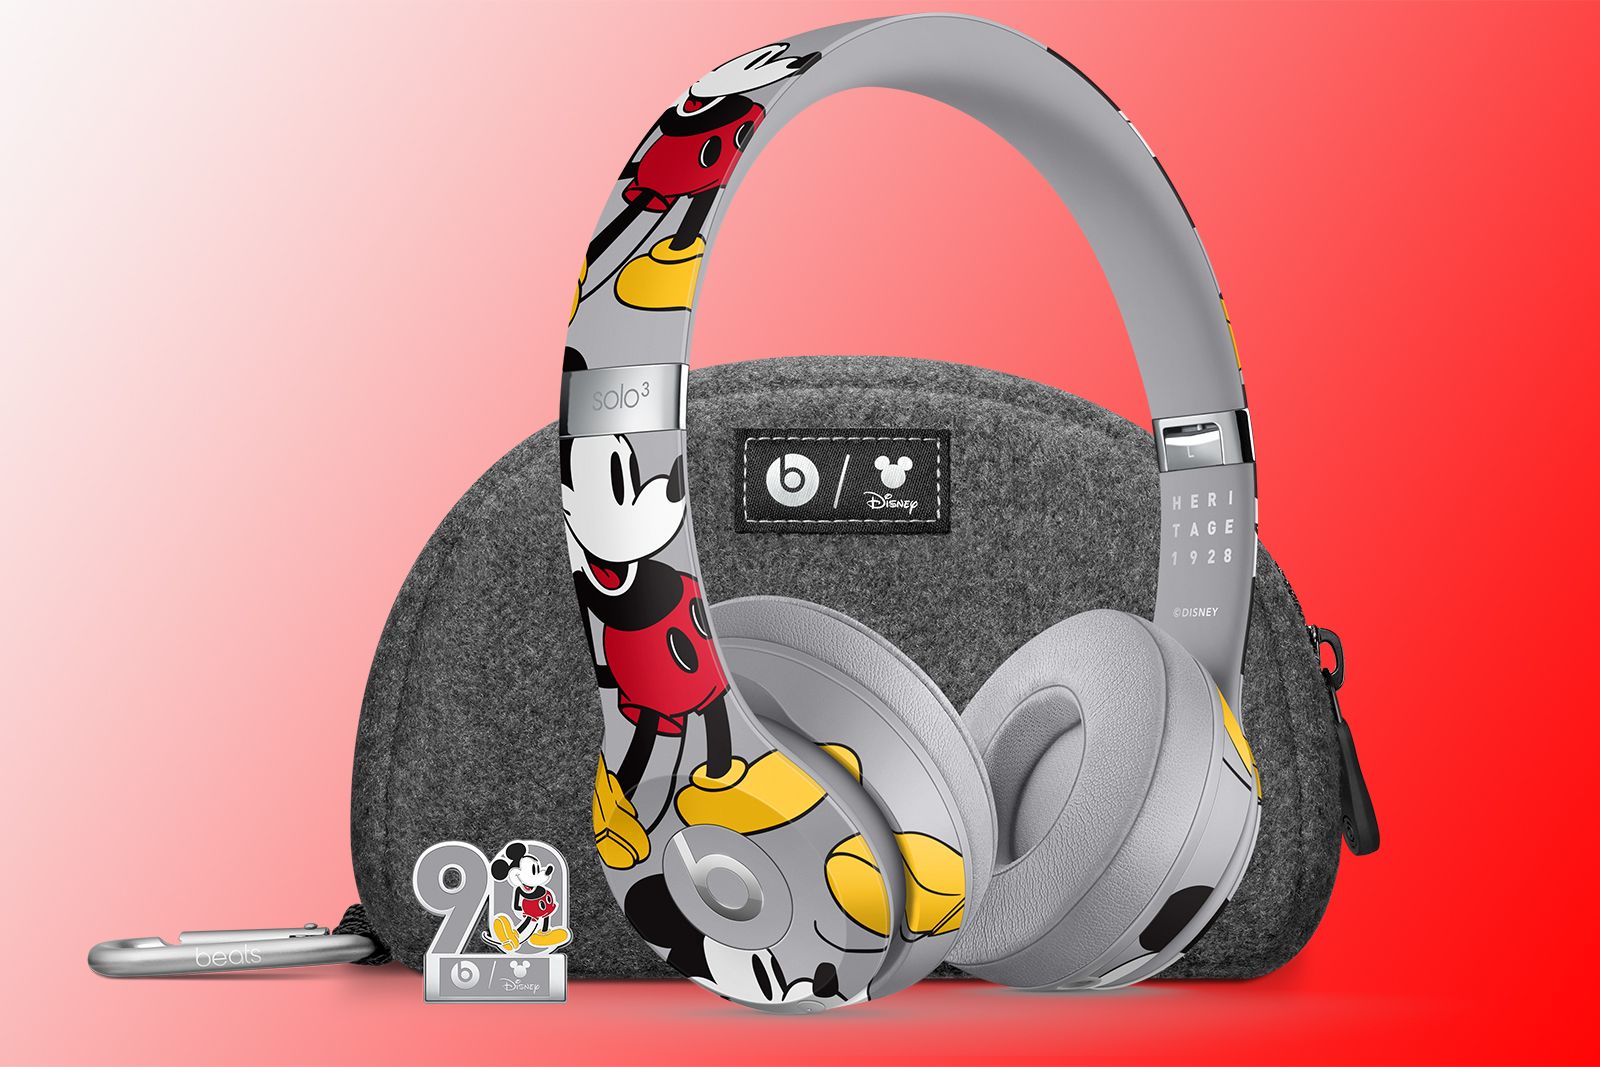 When will Mickey Mouse Beats Solo3 headphones be available and how much image 1